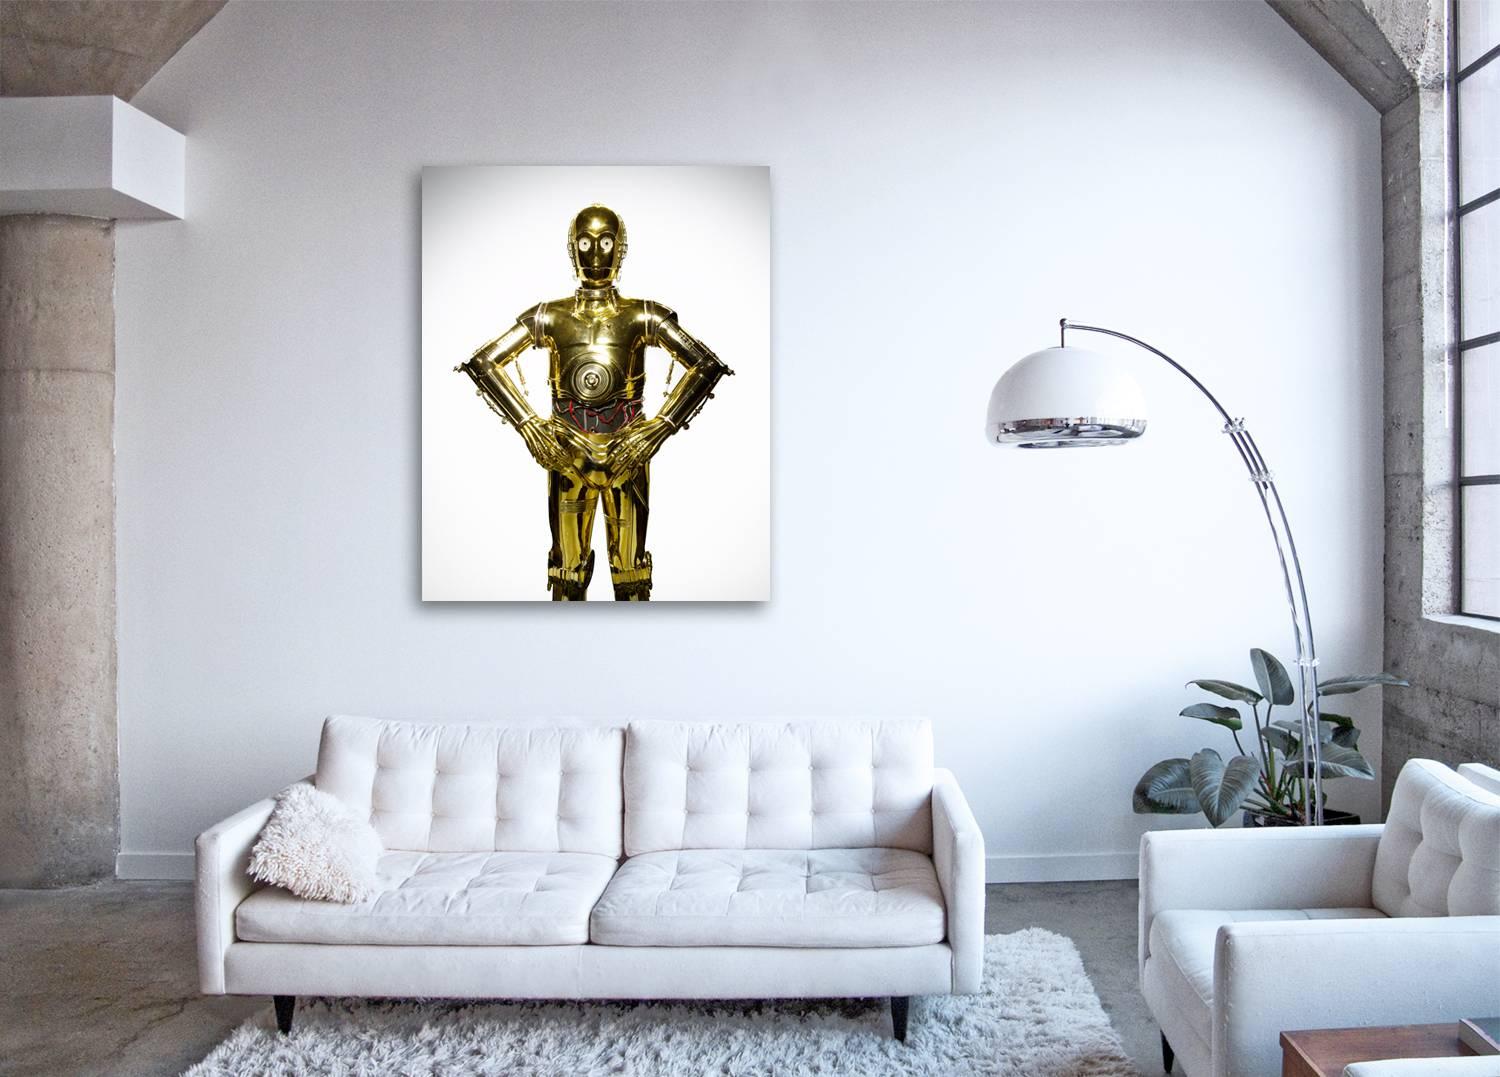 Star Wars  C-3PO  still life photograph of the original iconic - Photograph by Tom Schierlitz